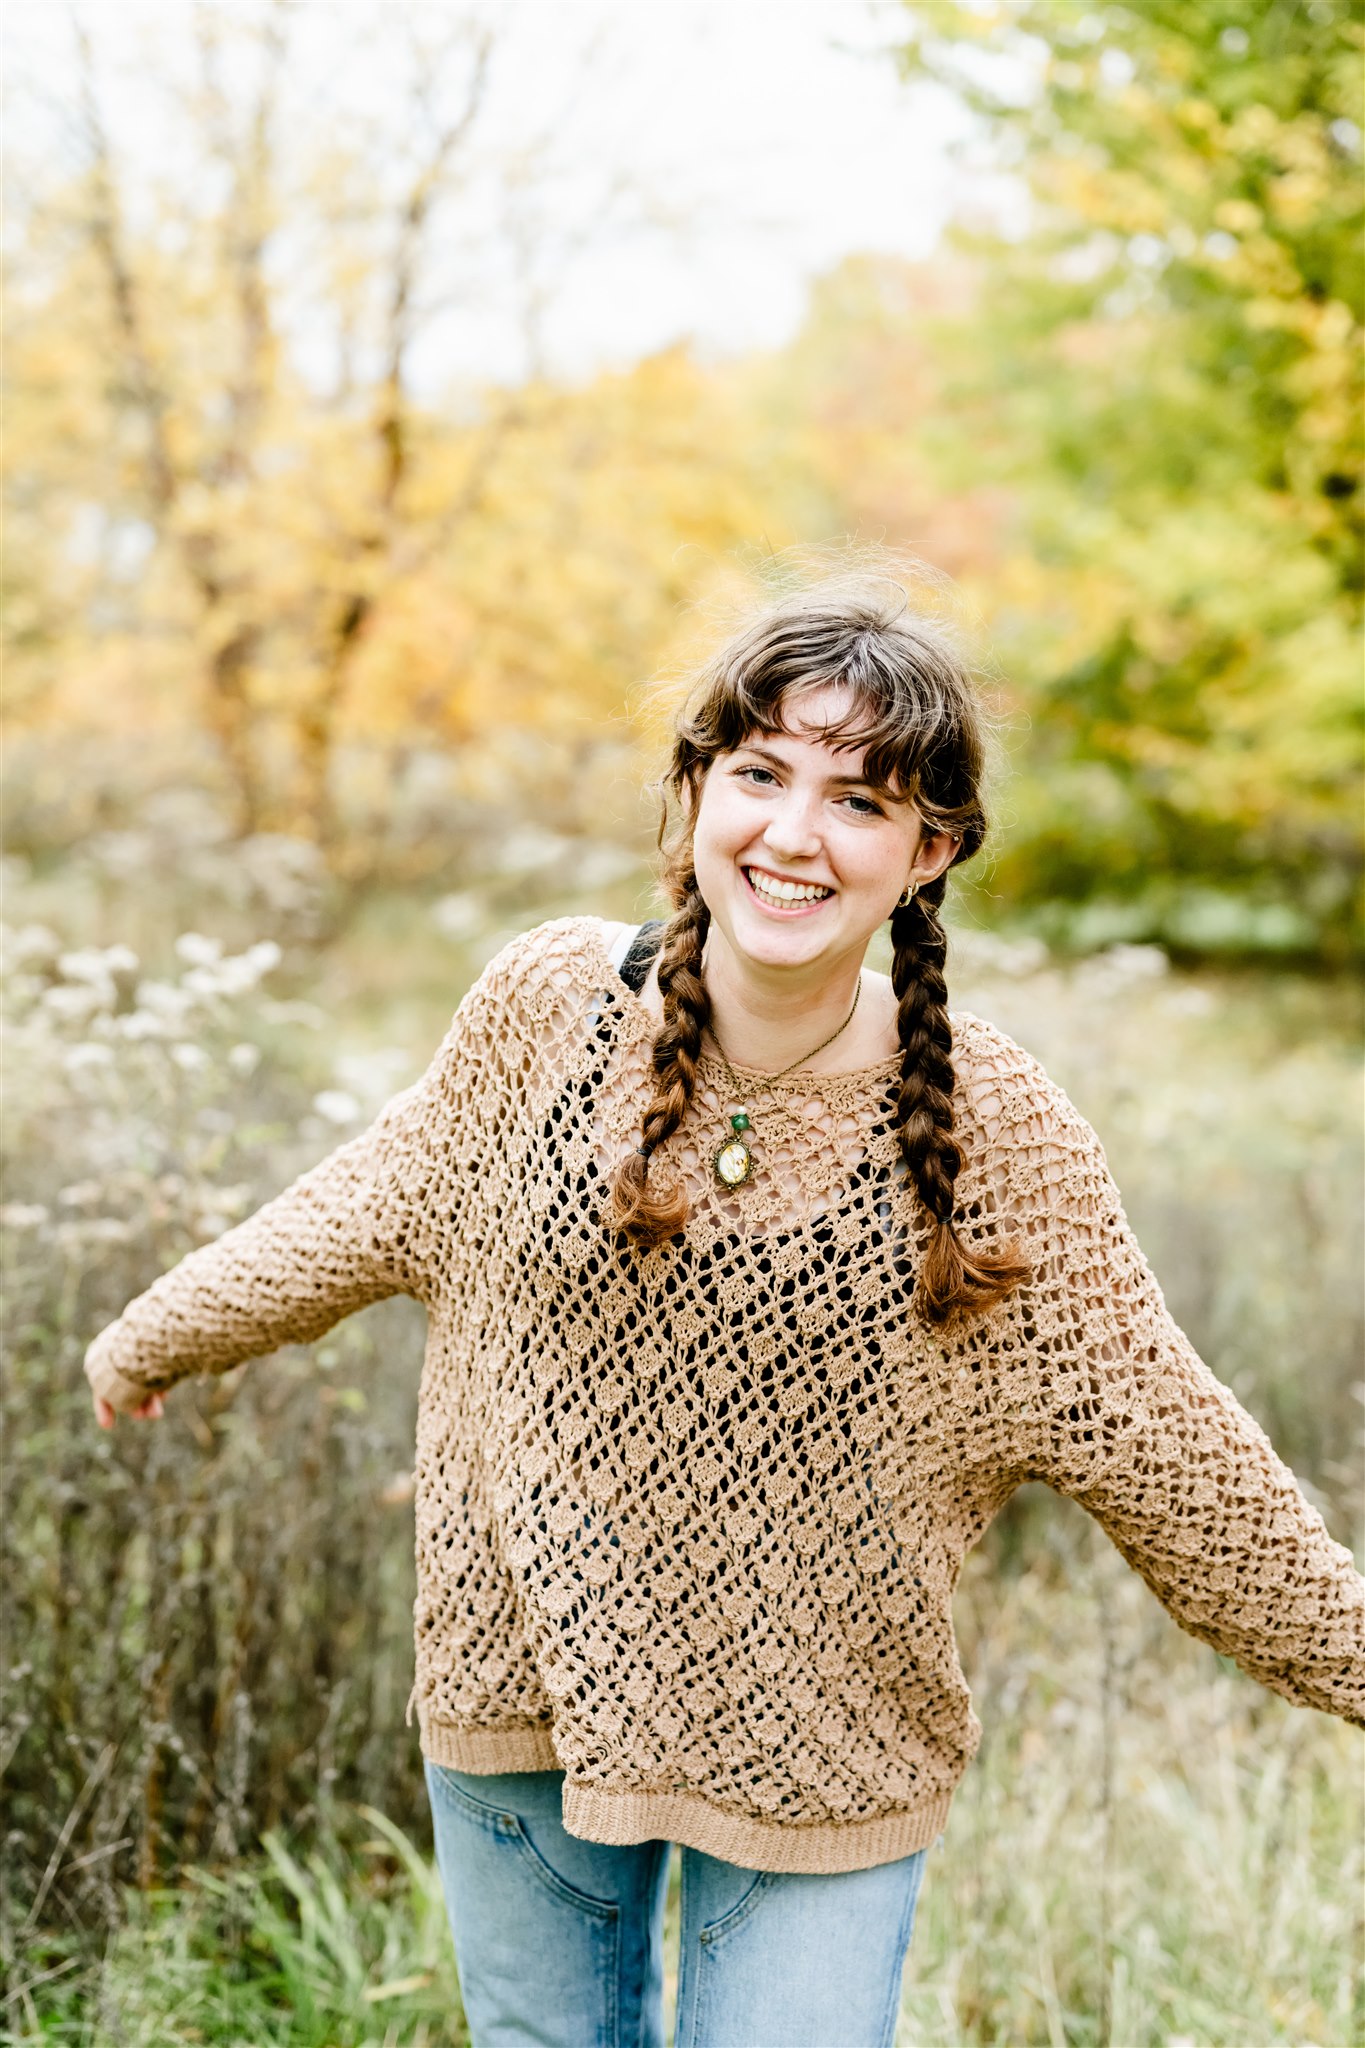 A high school senior in jeans and a lace sweater laughs while walking through a field of tall grasses thanks to Catholic High Schools Chicago Suburbs